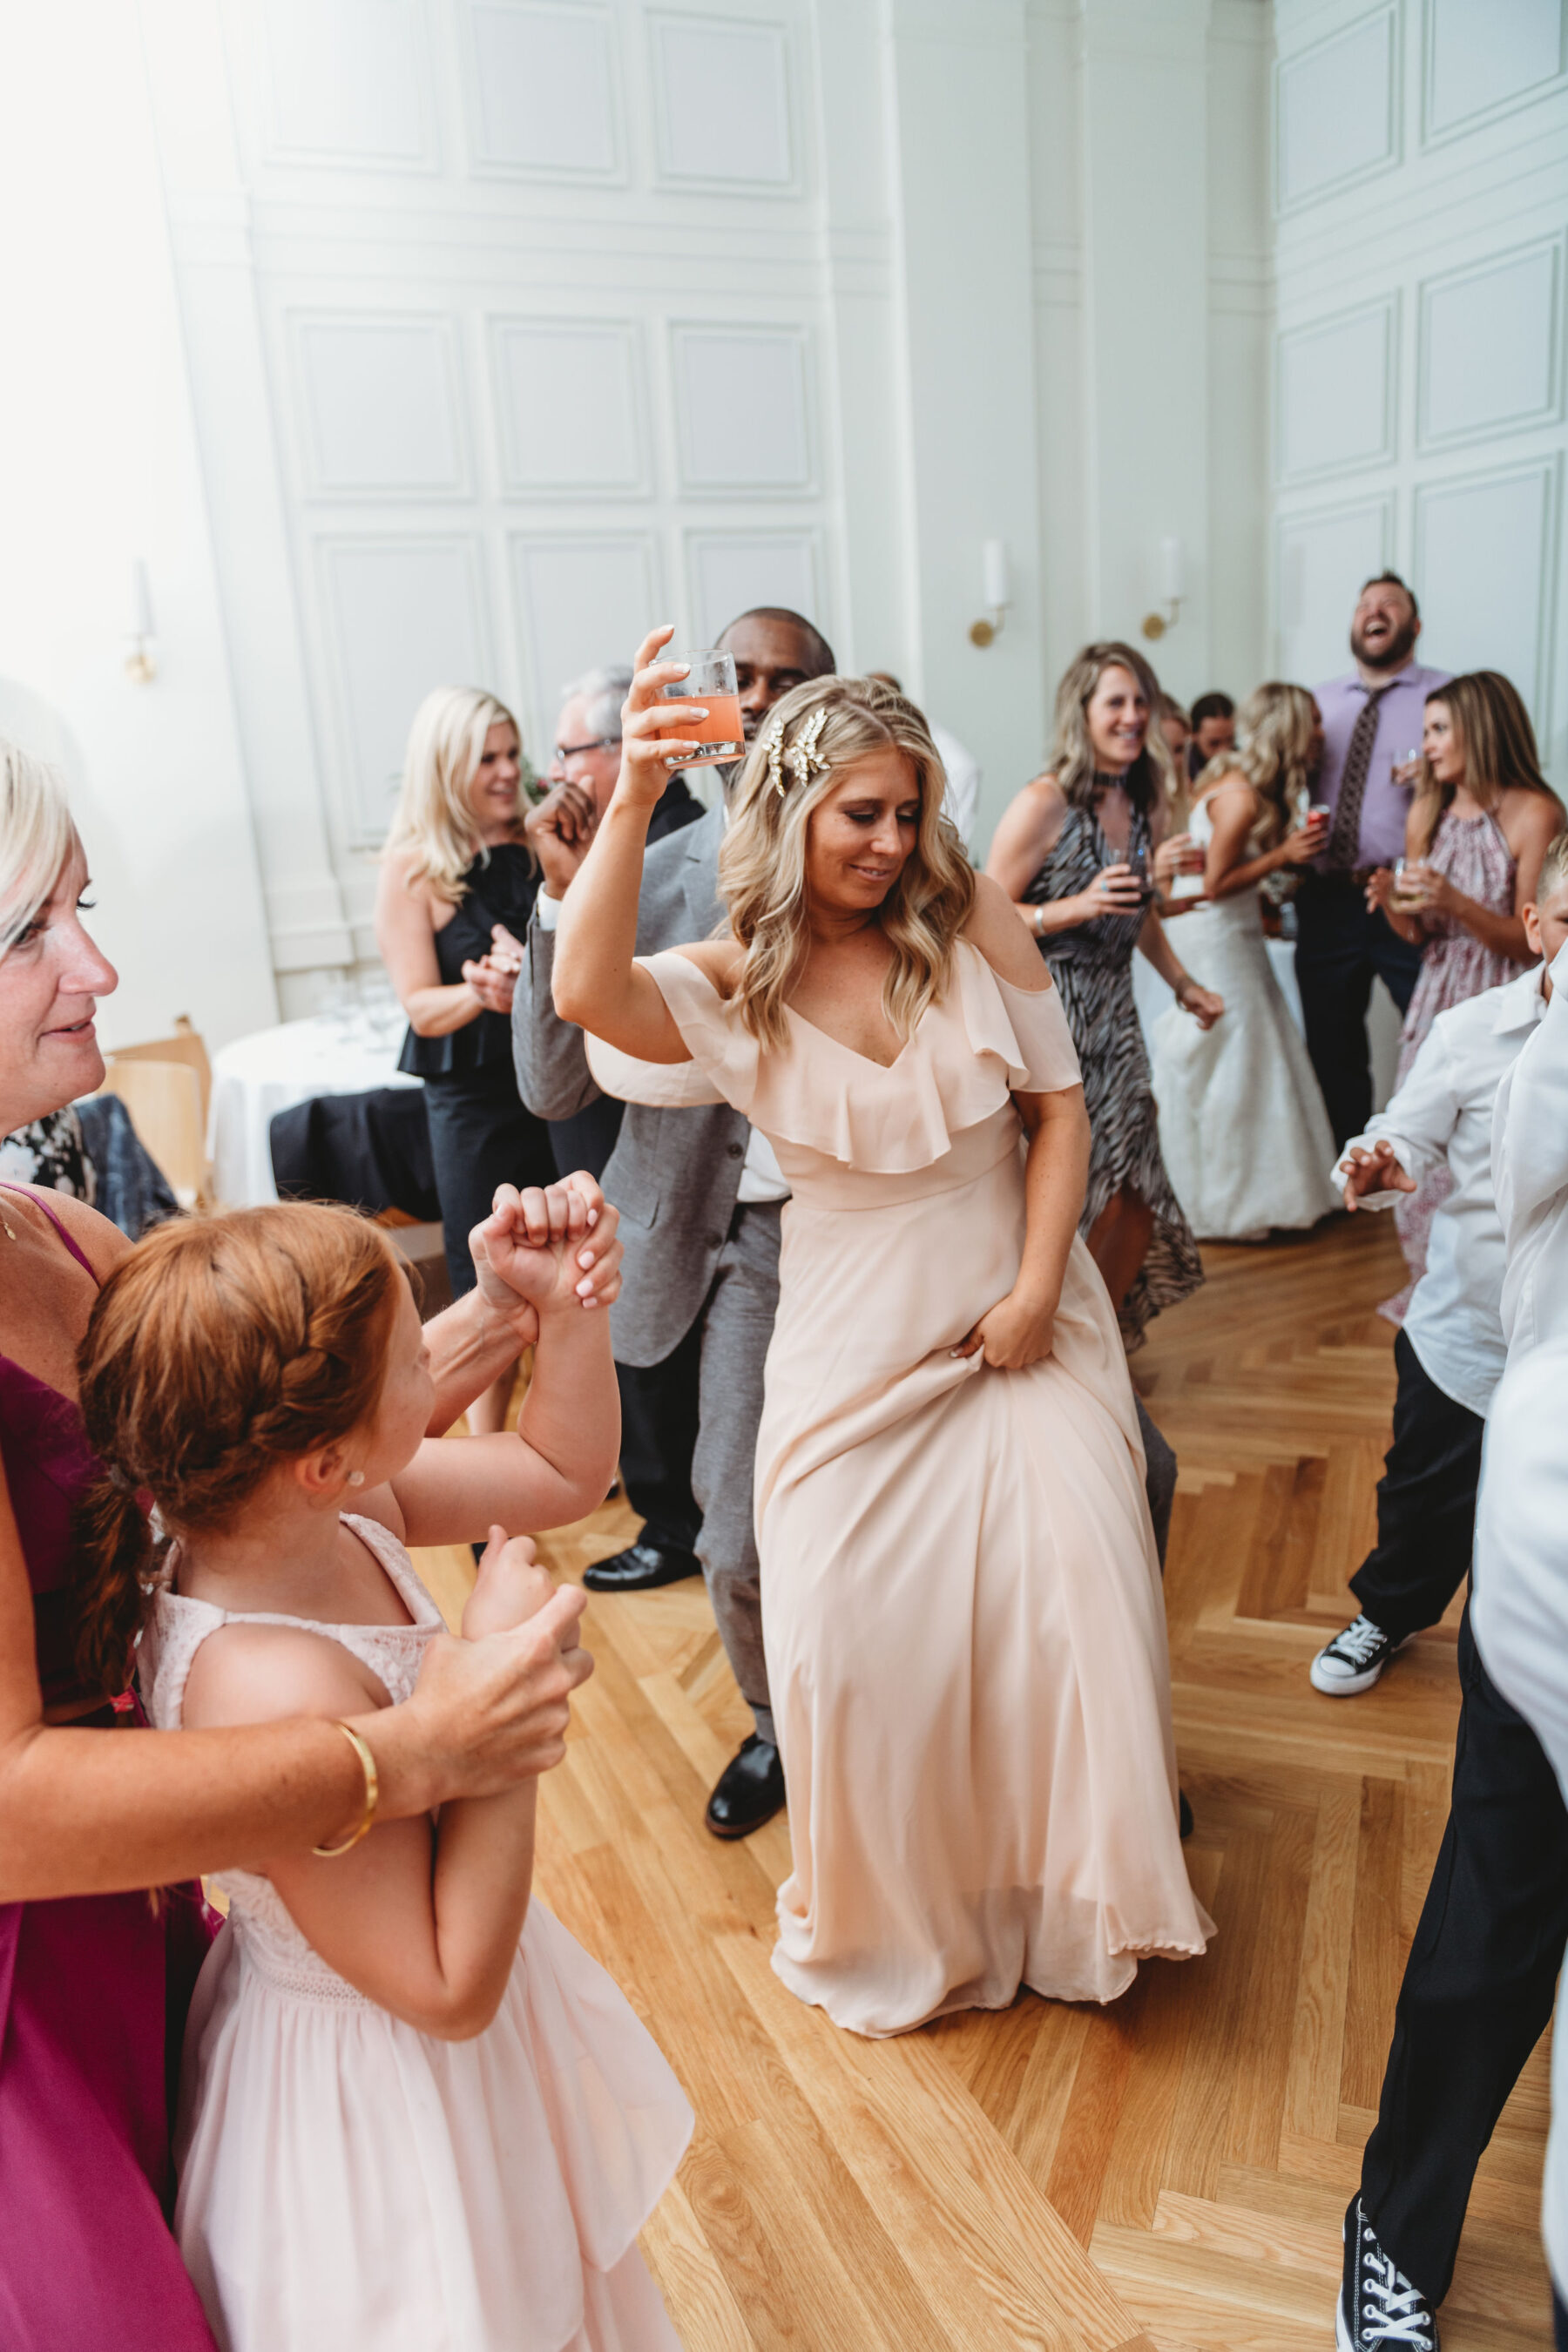 Summer Tennessee Wedding at Noelle from Jayde J. Smith Events featured on Nashville Bride Guide